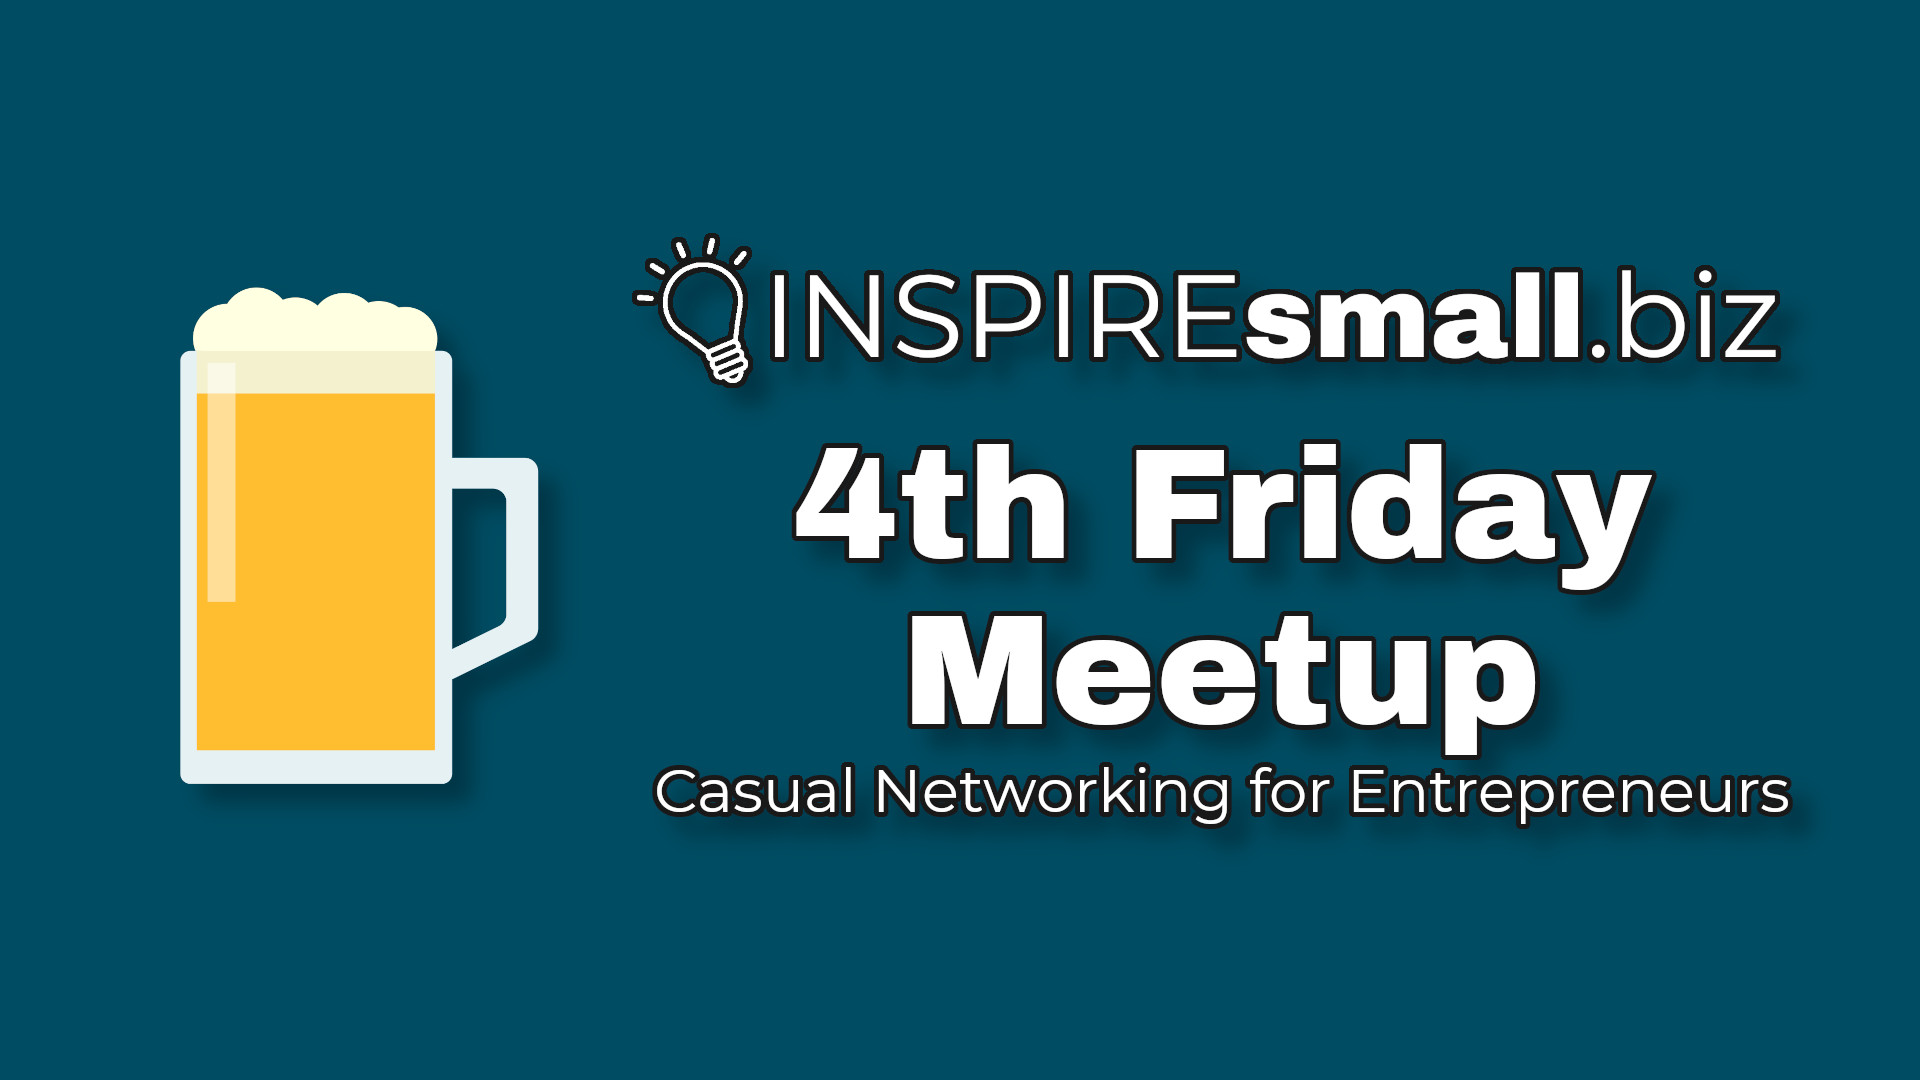 INSPIREsmall.biz 4th Friday Meetup - Casual Networking for Entrepreneurs, over a blue background with an image of a beer in a glass mug.